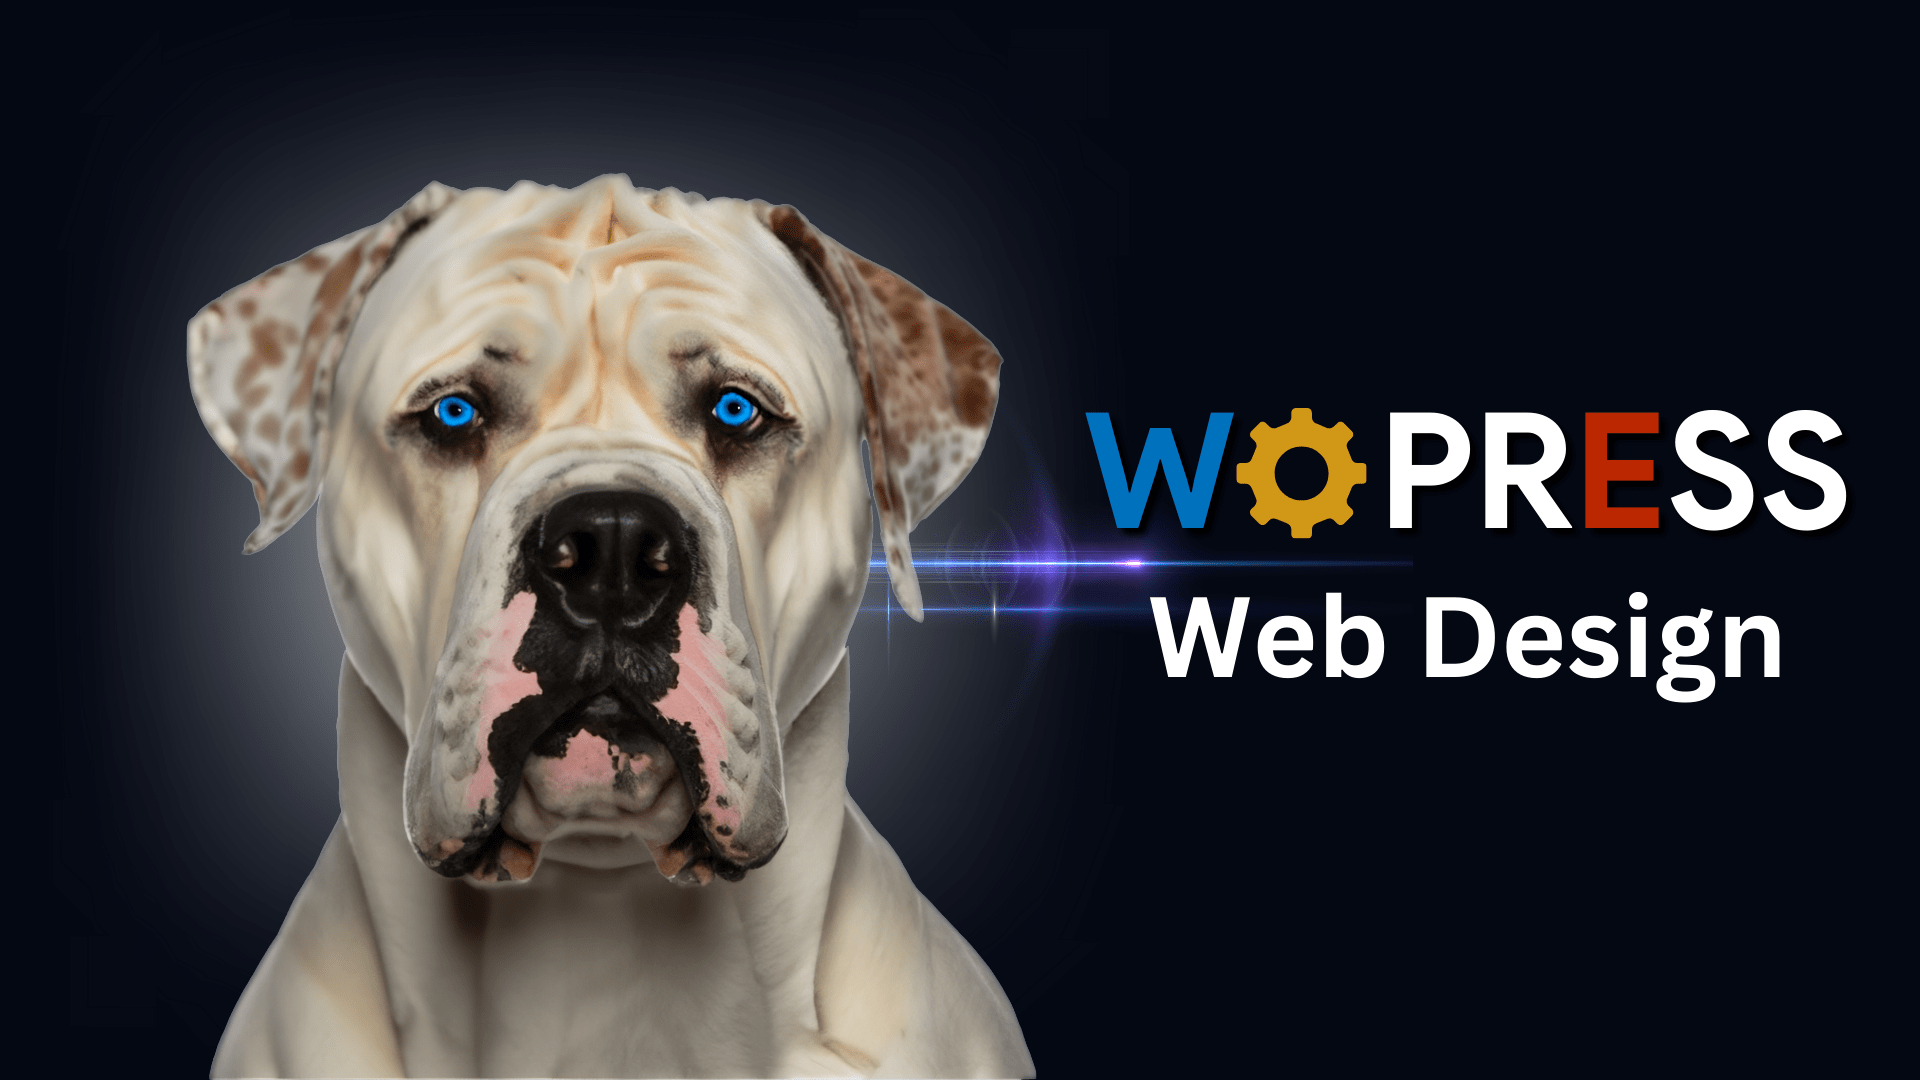 Wordpress website design and development for breeders is not just a talent but a skill that requires knowledge